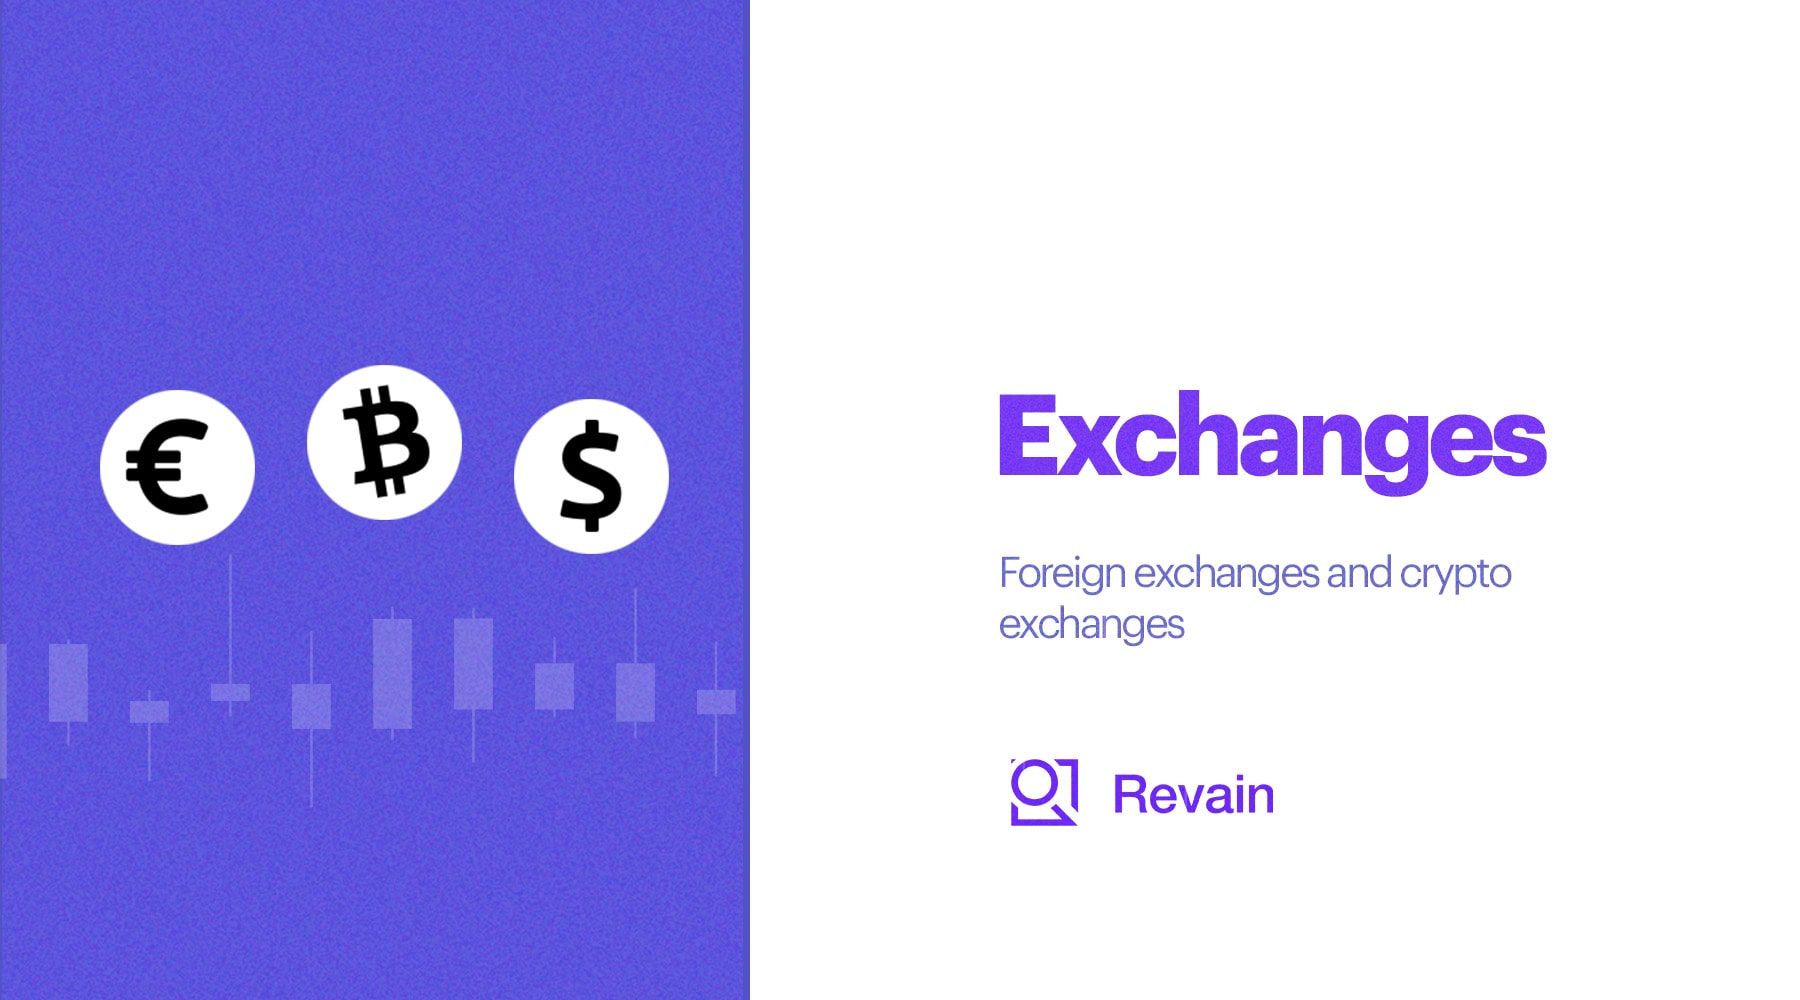 Forex vs Crypto Exchanges: what is the difference?